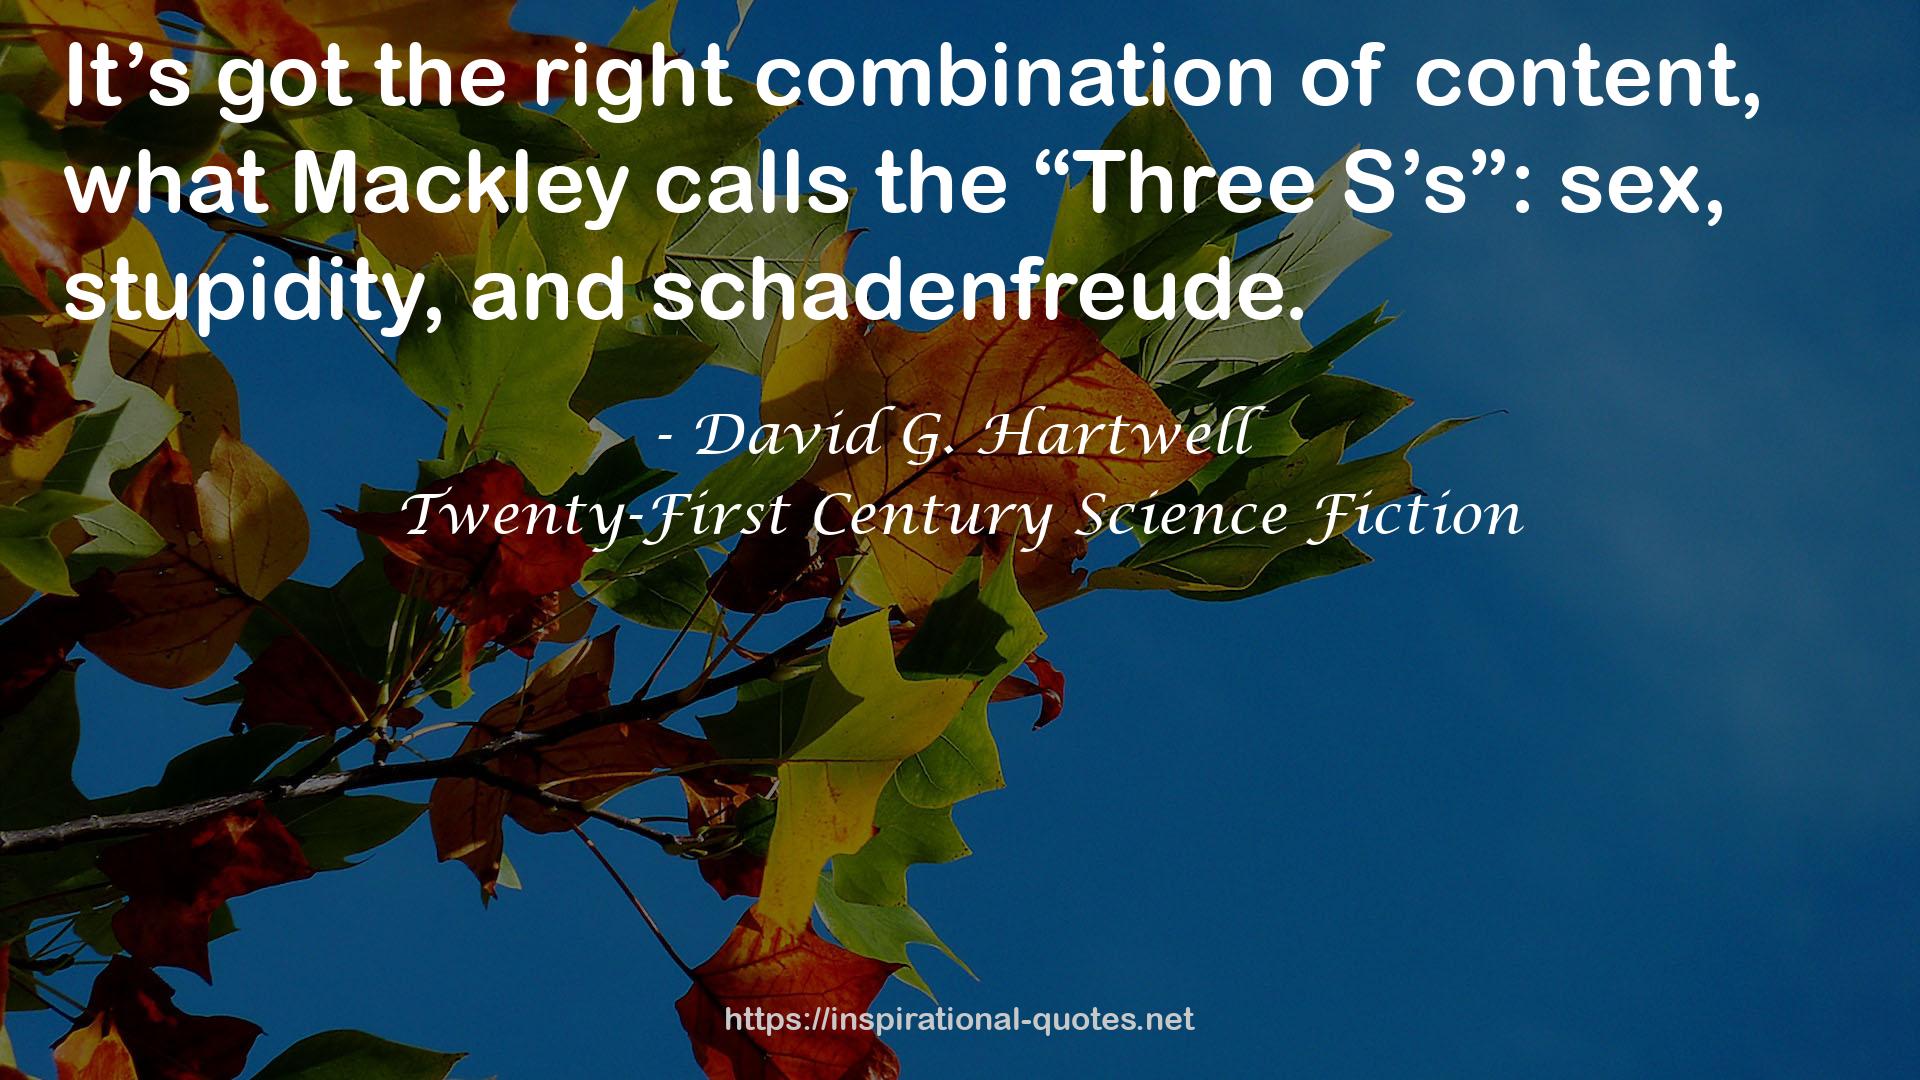 Twenty-First Century Science Fiction QUOTES